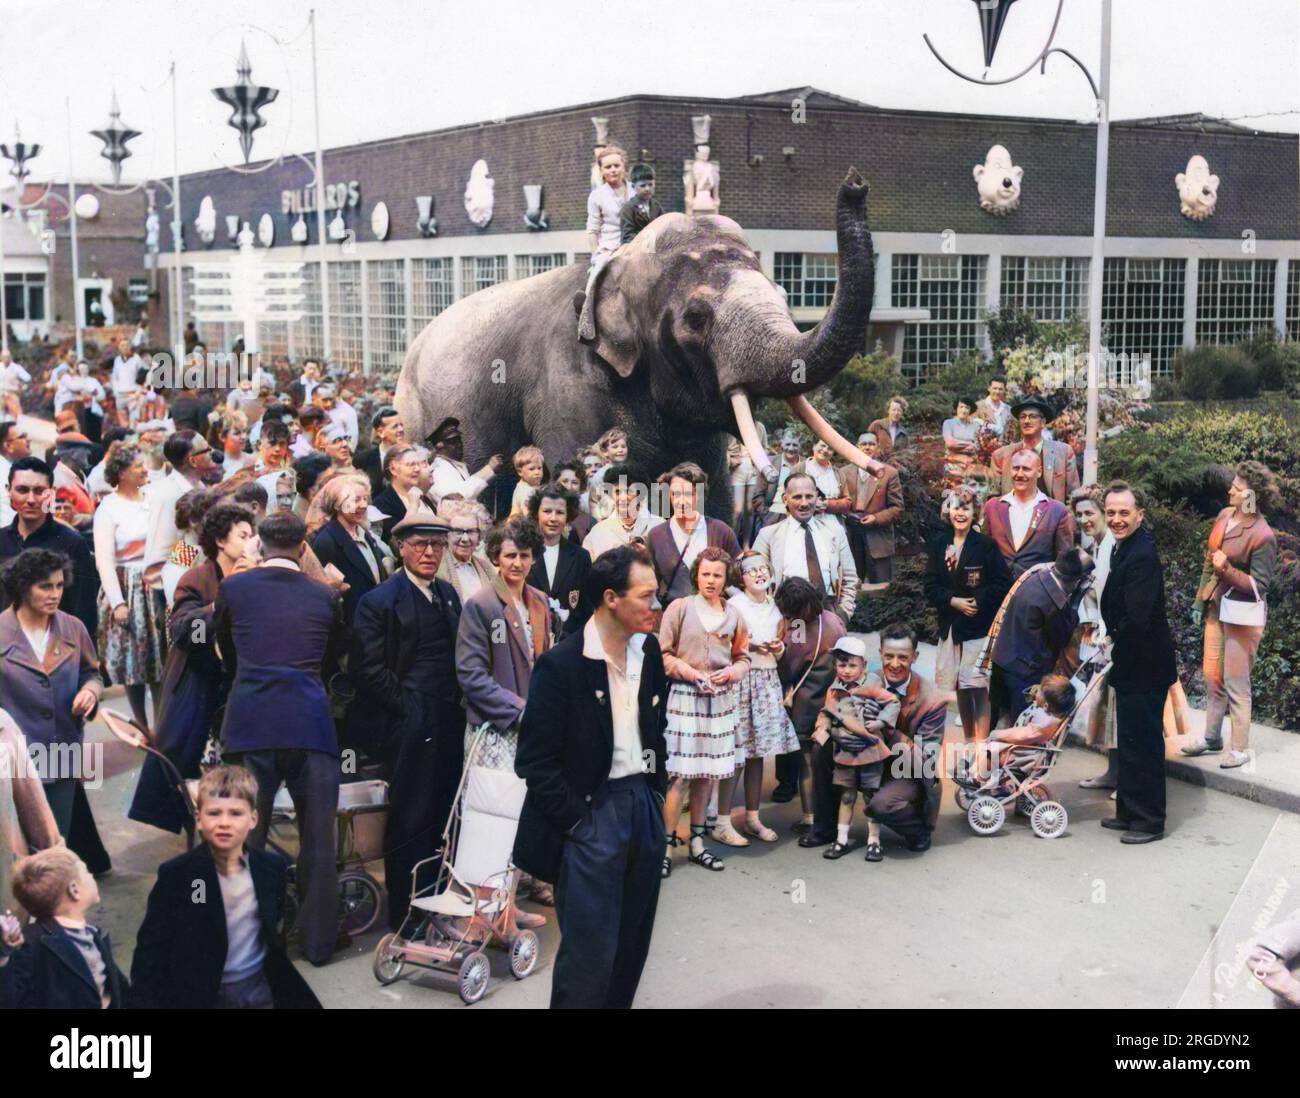 A crowd of holidaymakers at Butlin's holiday camp, Filey, pose with an obliging elephant known as Big Charlie. æBig CharlieÆ was moved from Ayr, Scotland to Filey in the late 1950s. Billy Butlin put an advert in The Times offering ú1,000 in cash for the safe delivery of Big Charlie over the distance. The advertisement caused a media storm and Big Charlie became an overnight celebrity. He was described by ButlinÆs publicity as ôthe largest elephant in captivityö. Stock Photo